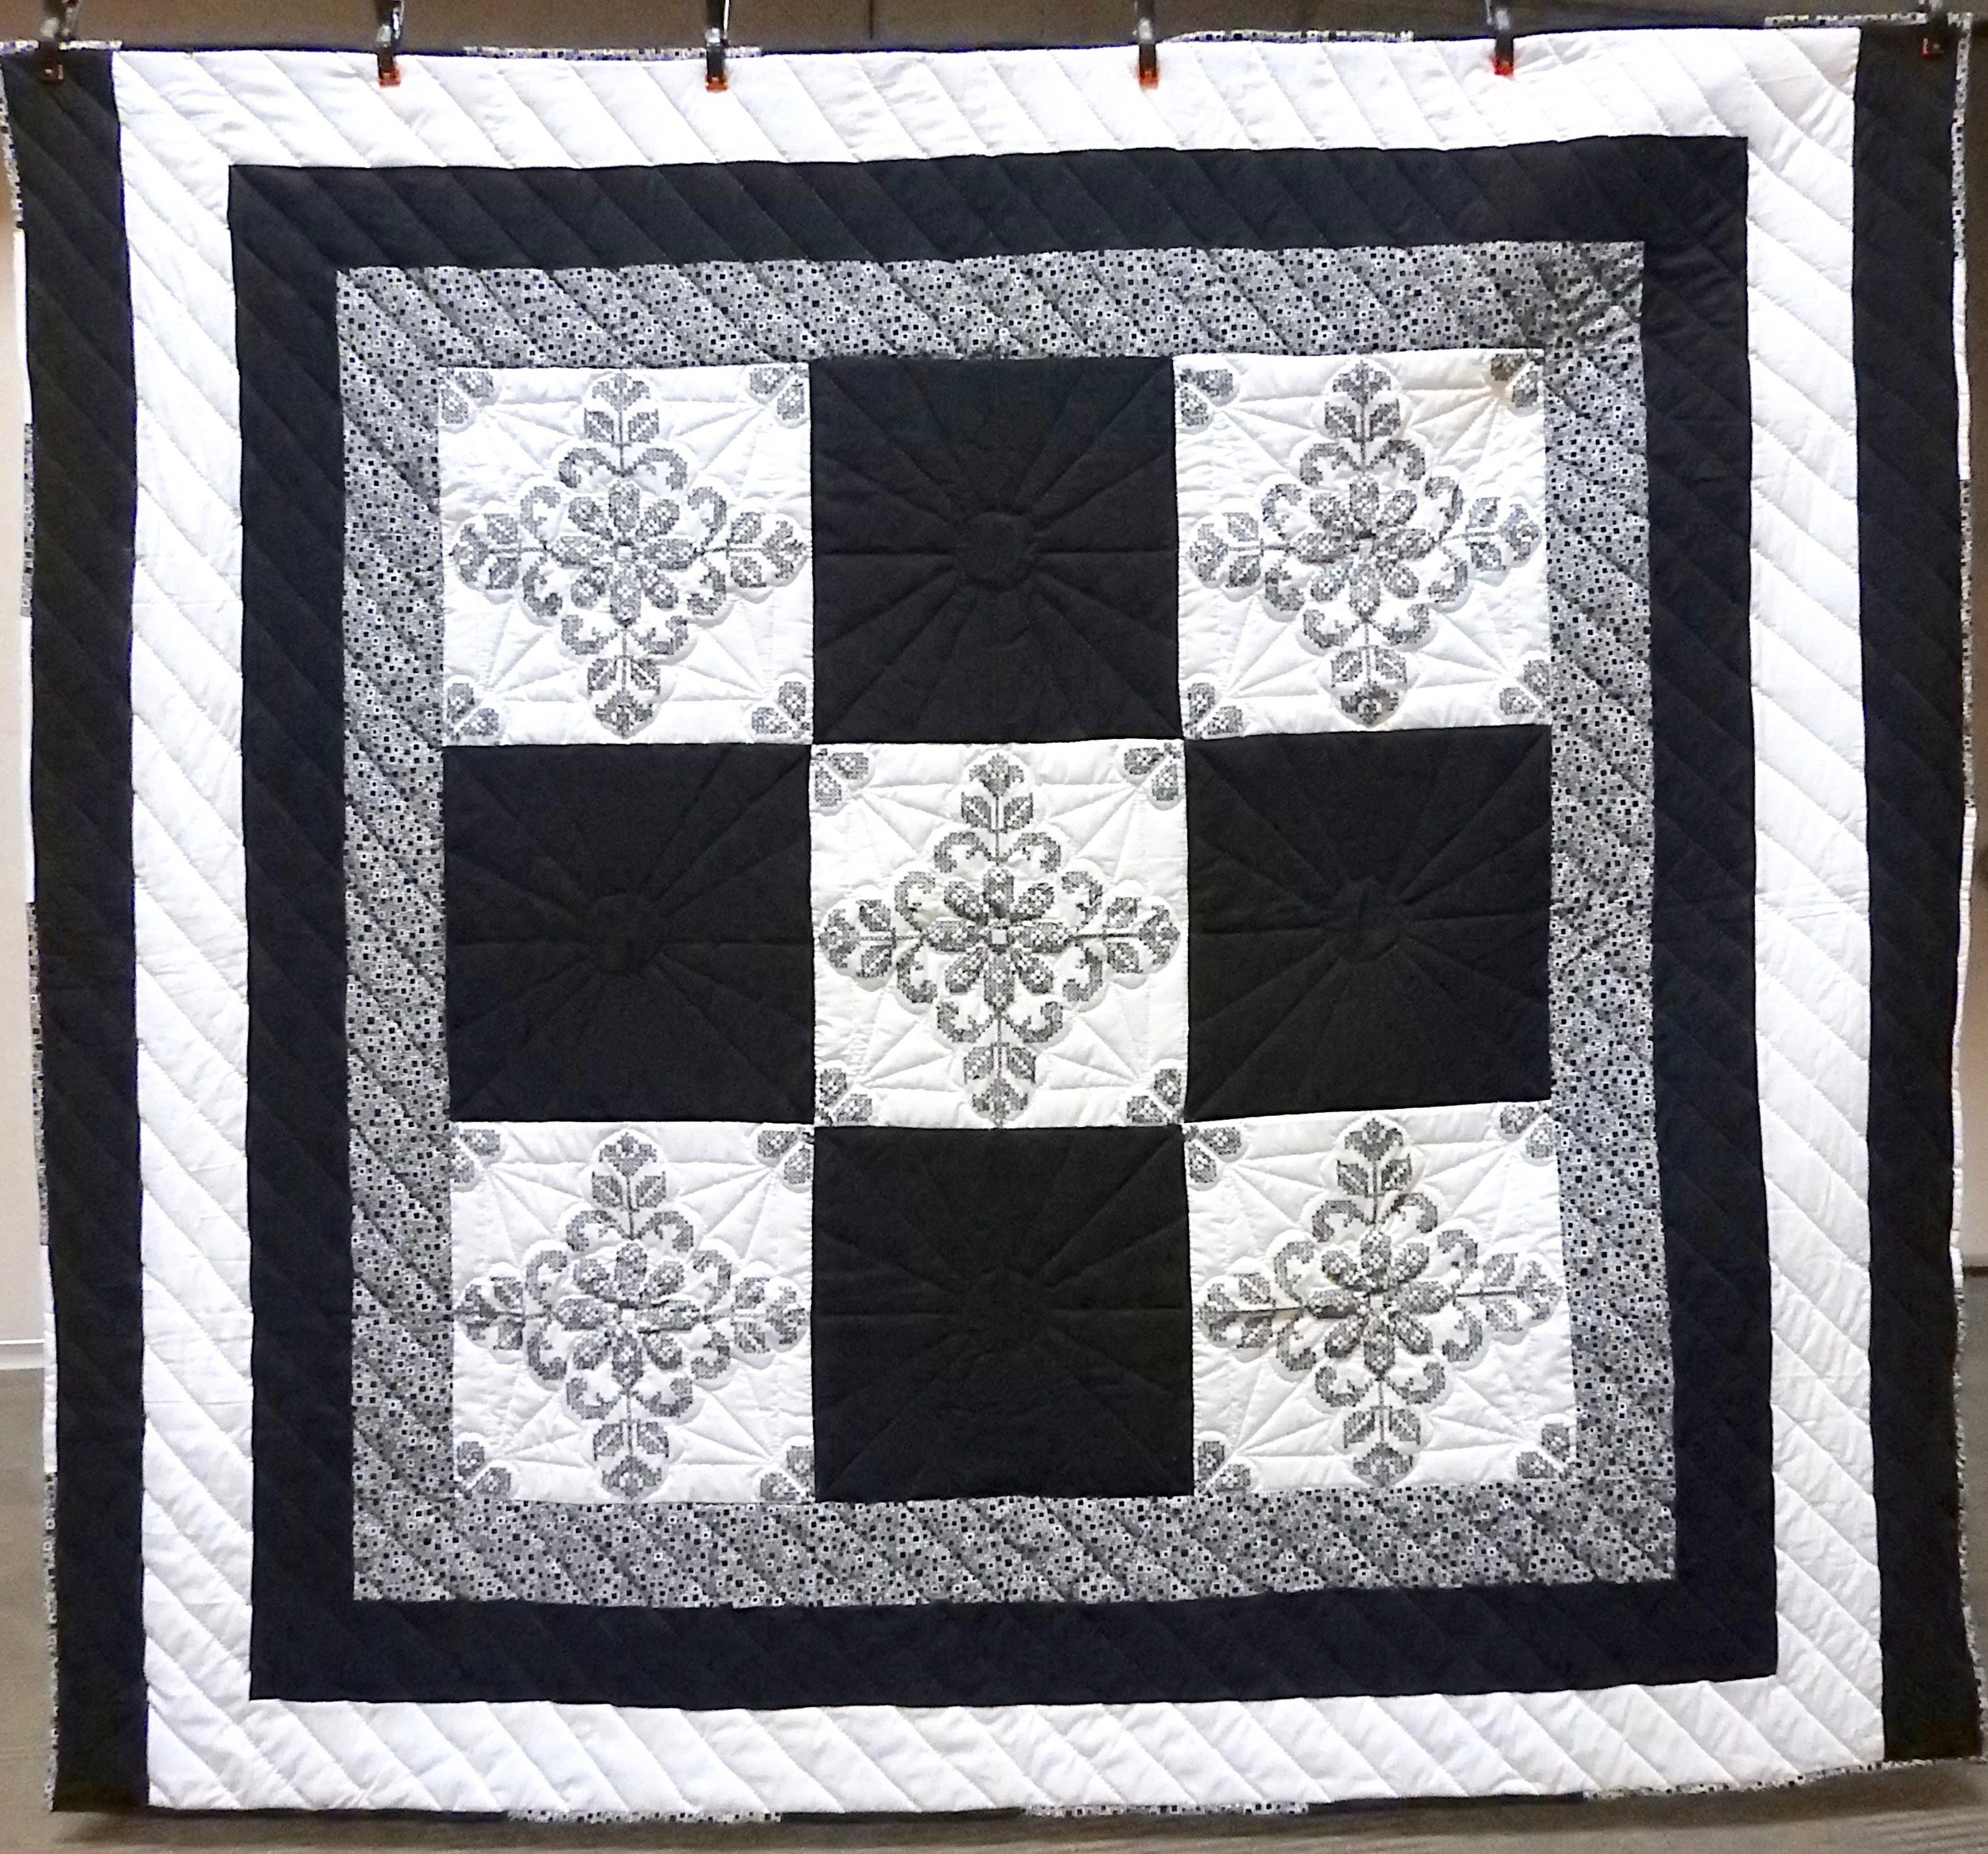 Midnight Sun, Pieced, Embroidered, Hand Quilted, donated by First Mennonite, Middlebury,  72 x 83”